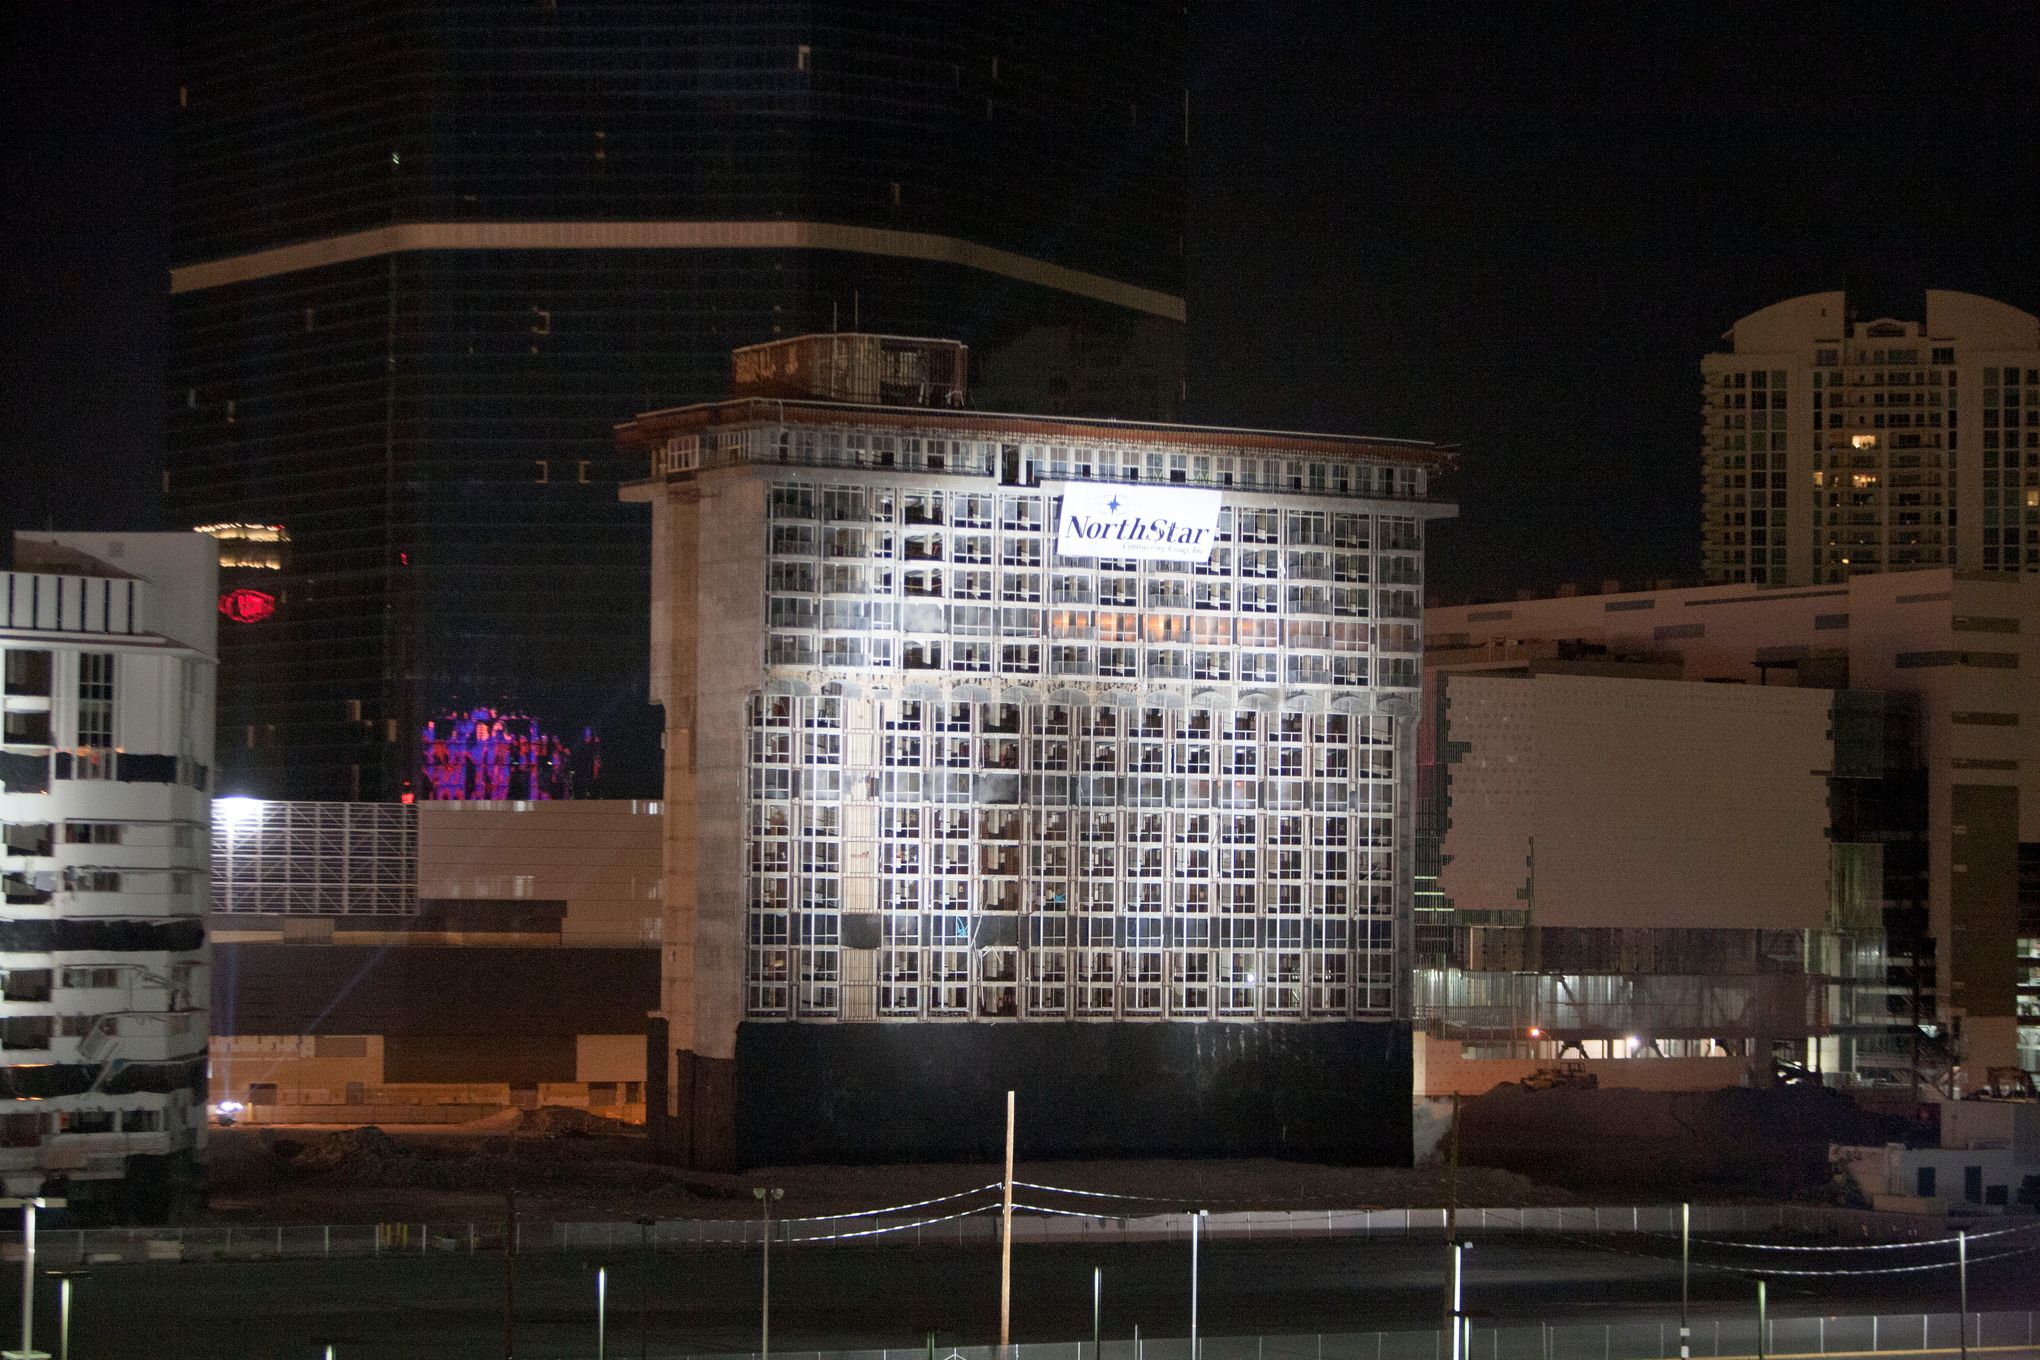 Plan to demolish historic Riviera Hotel & Casino approved by Las